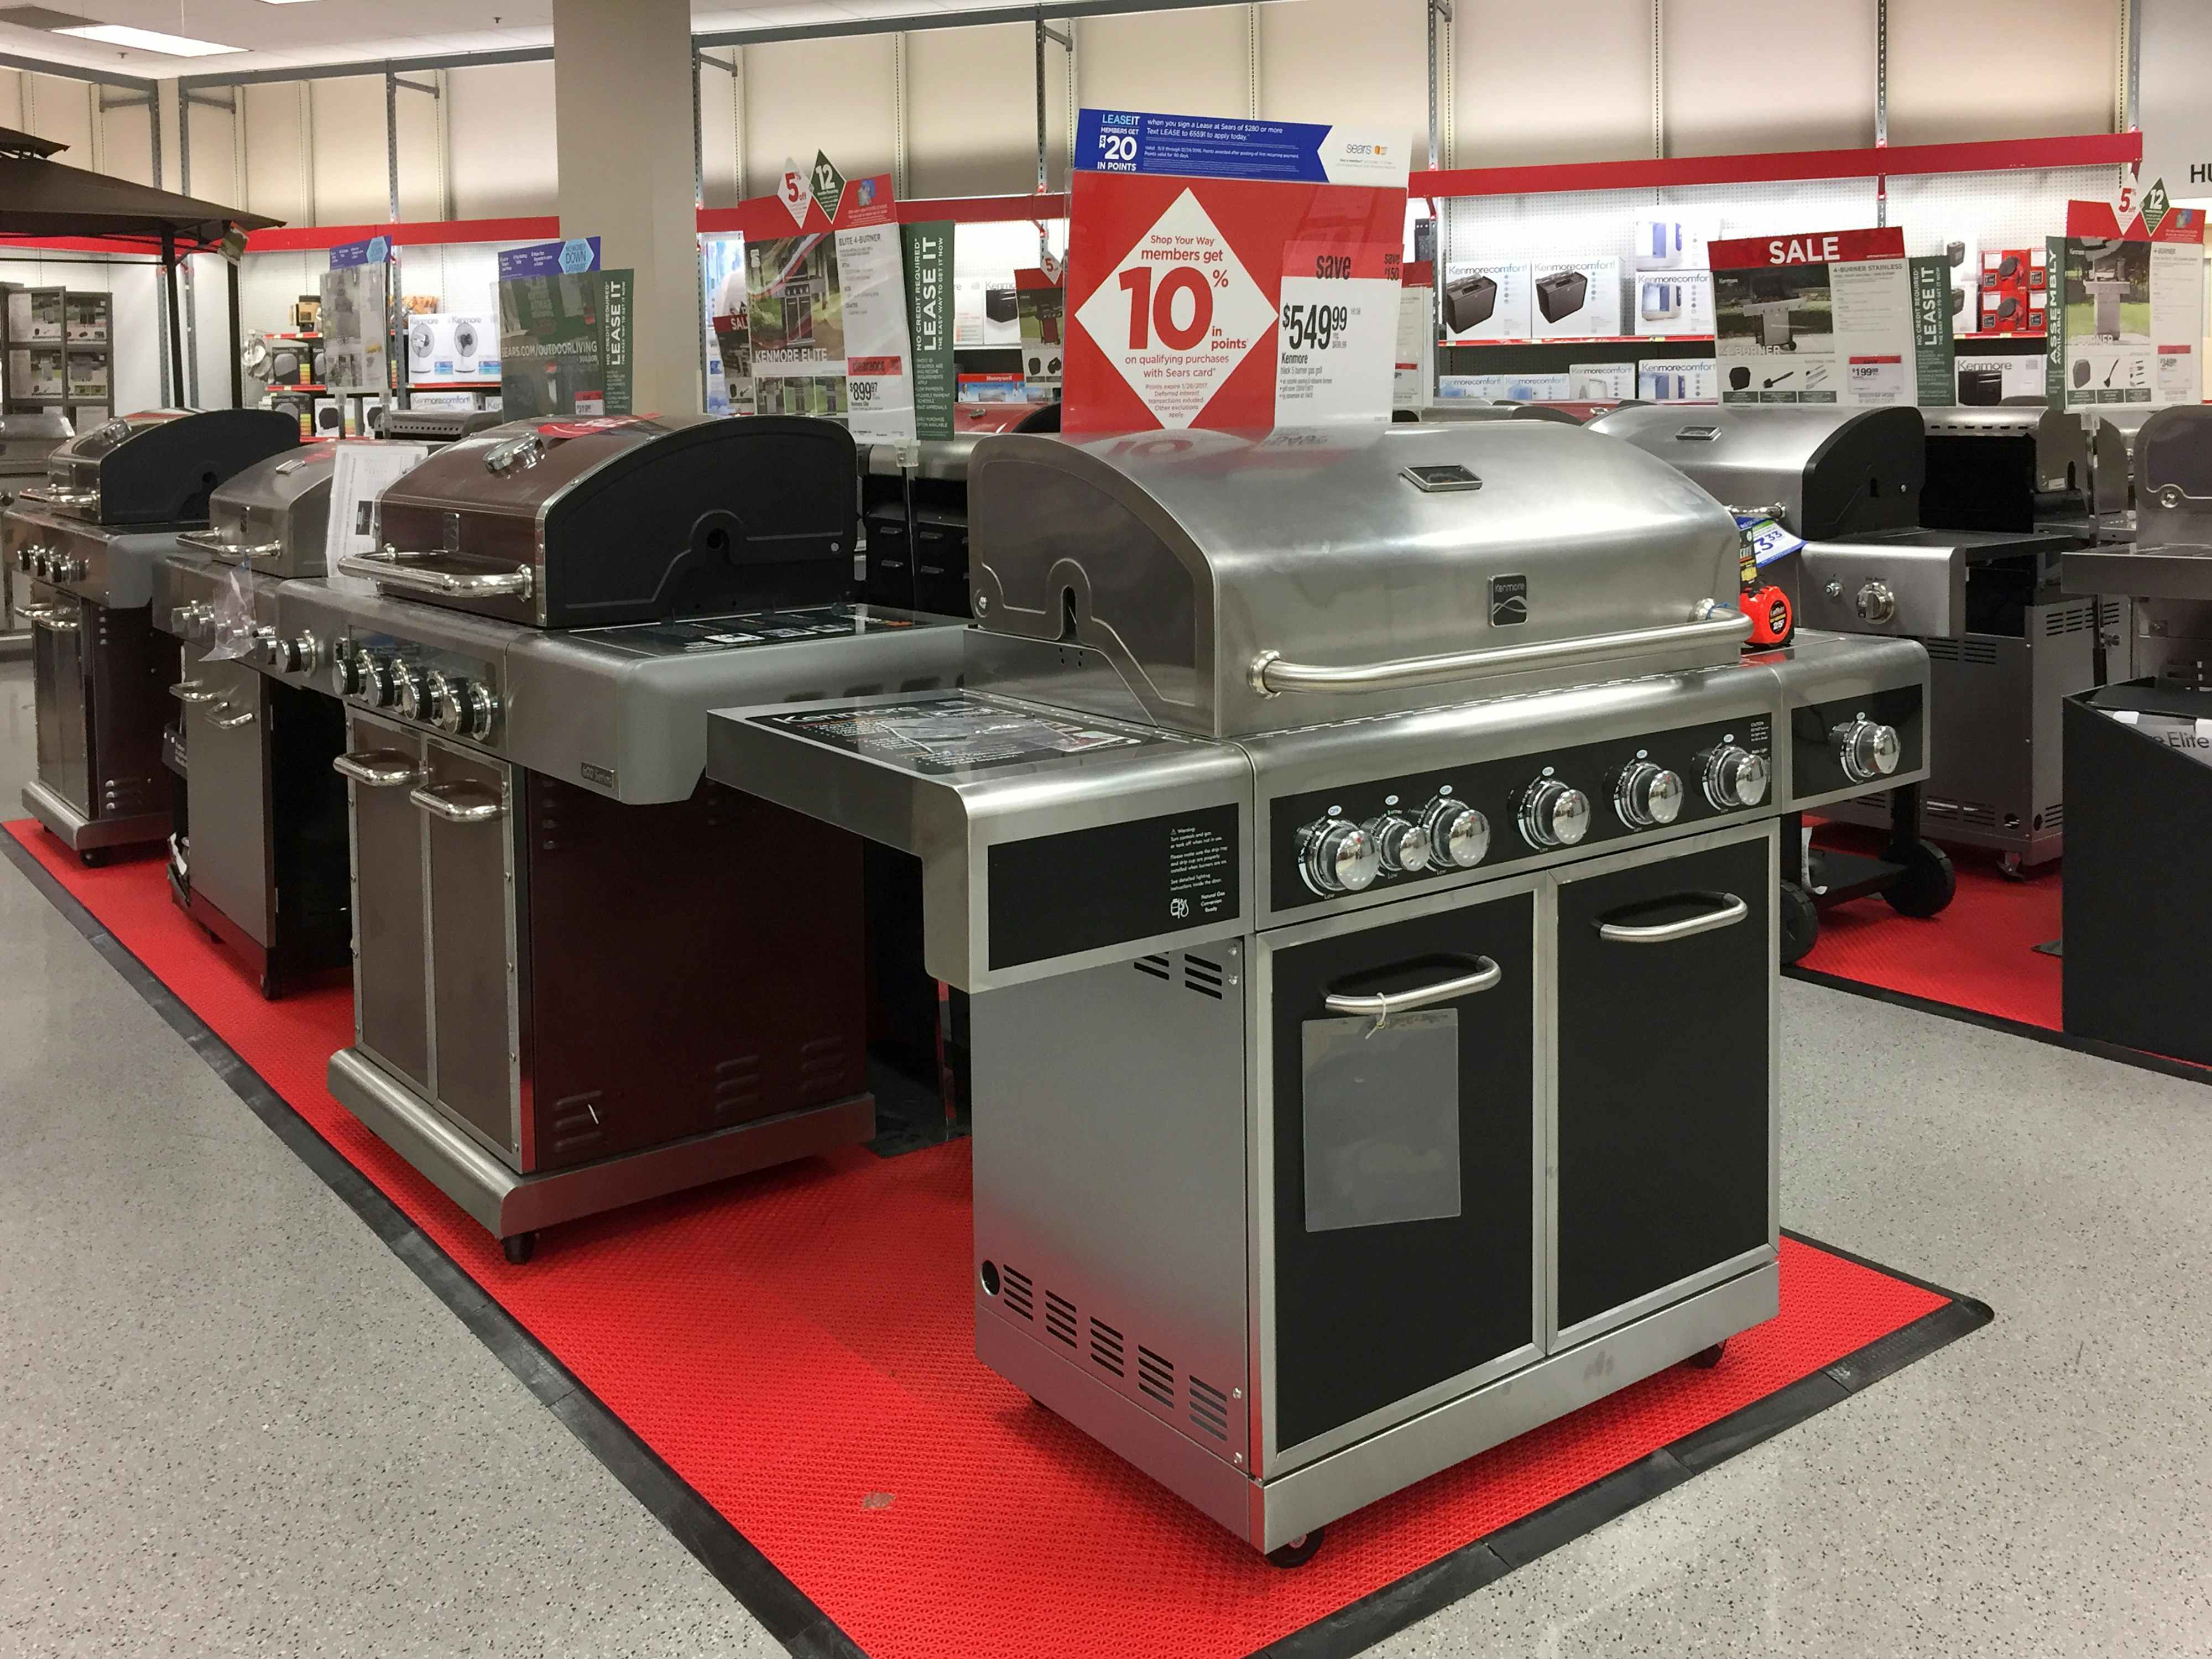 Row of grills. The first one is facing the camera and the rest are to the side. There is a sign above the first grill that has 10% written on it and a price tag that says $549.99